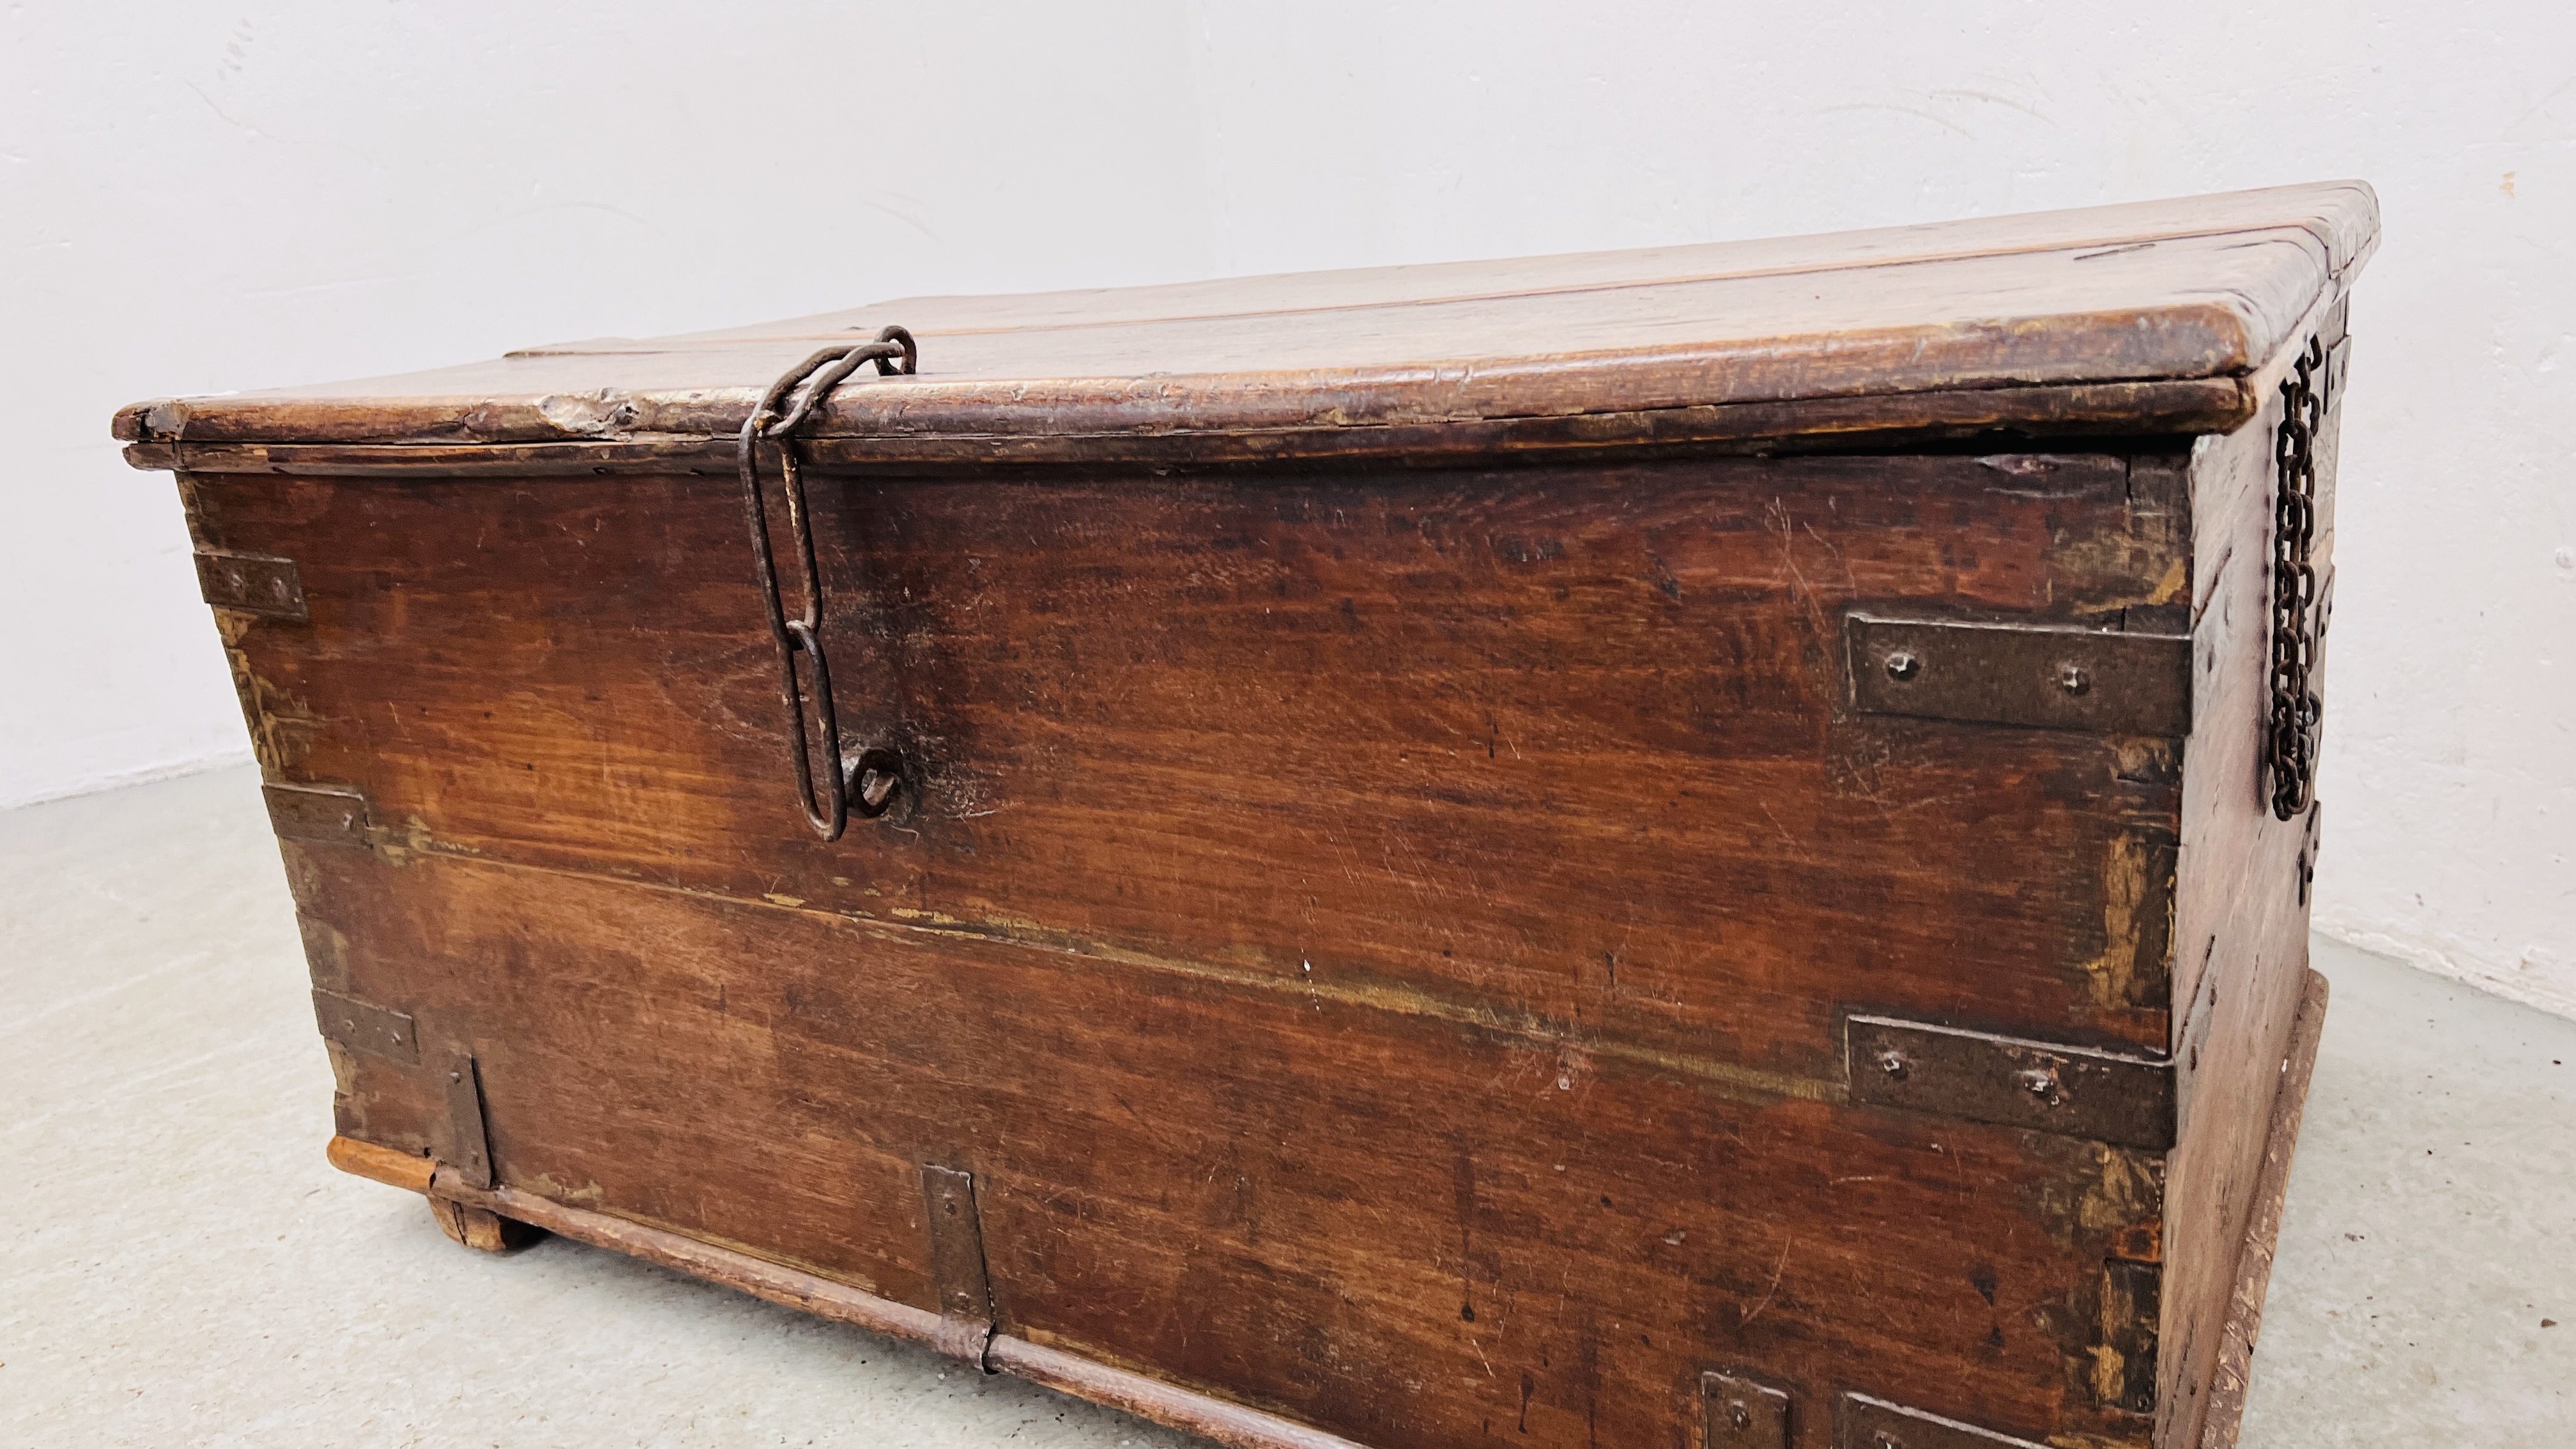 A HEAVY ANTIQUE OAK TRUNK WITH METAL BANDING WIDTH 102CM. DEPTH 61CM. HEIGHT 49CM. - Image 10 of 17